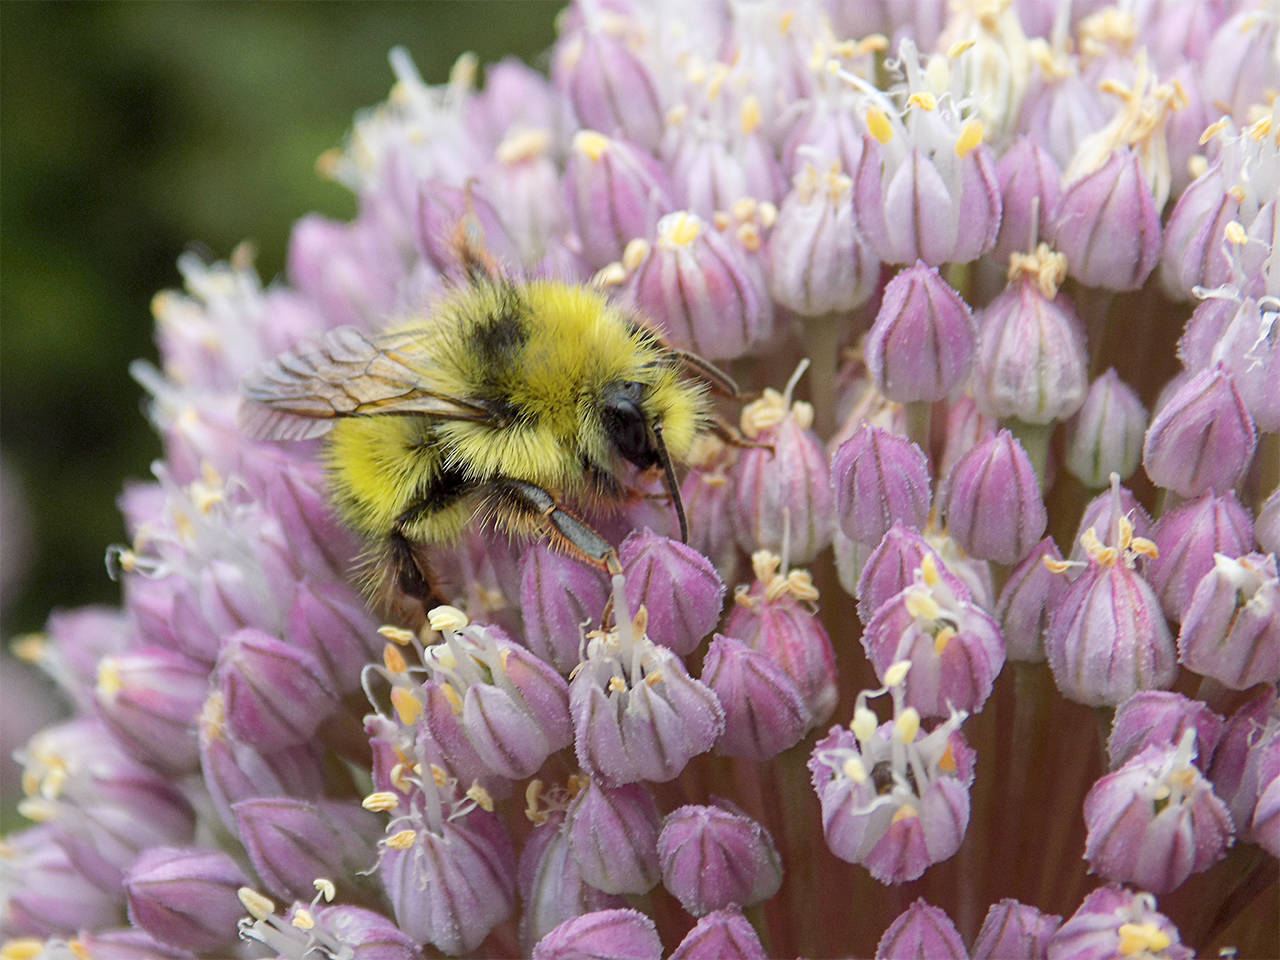 Honey bees can displace native bees